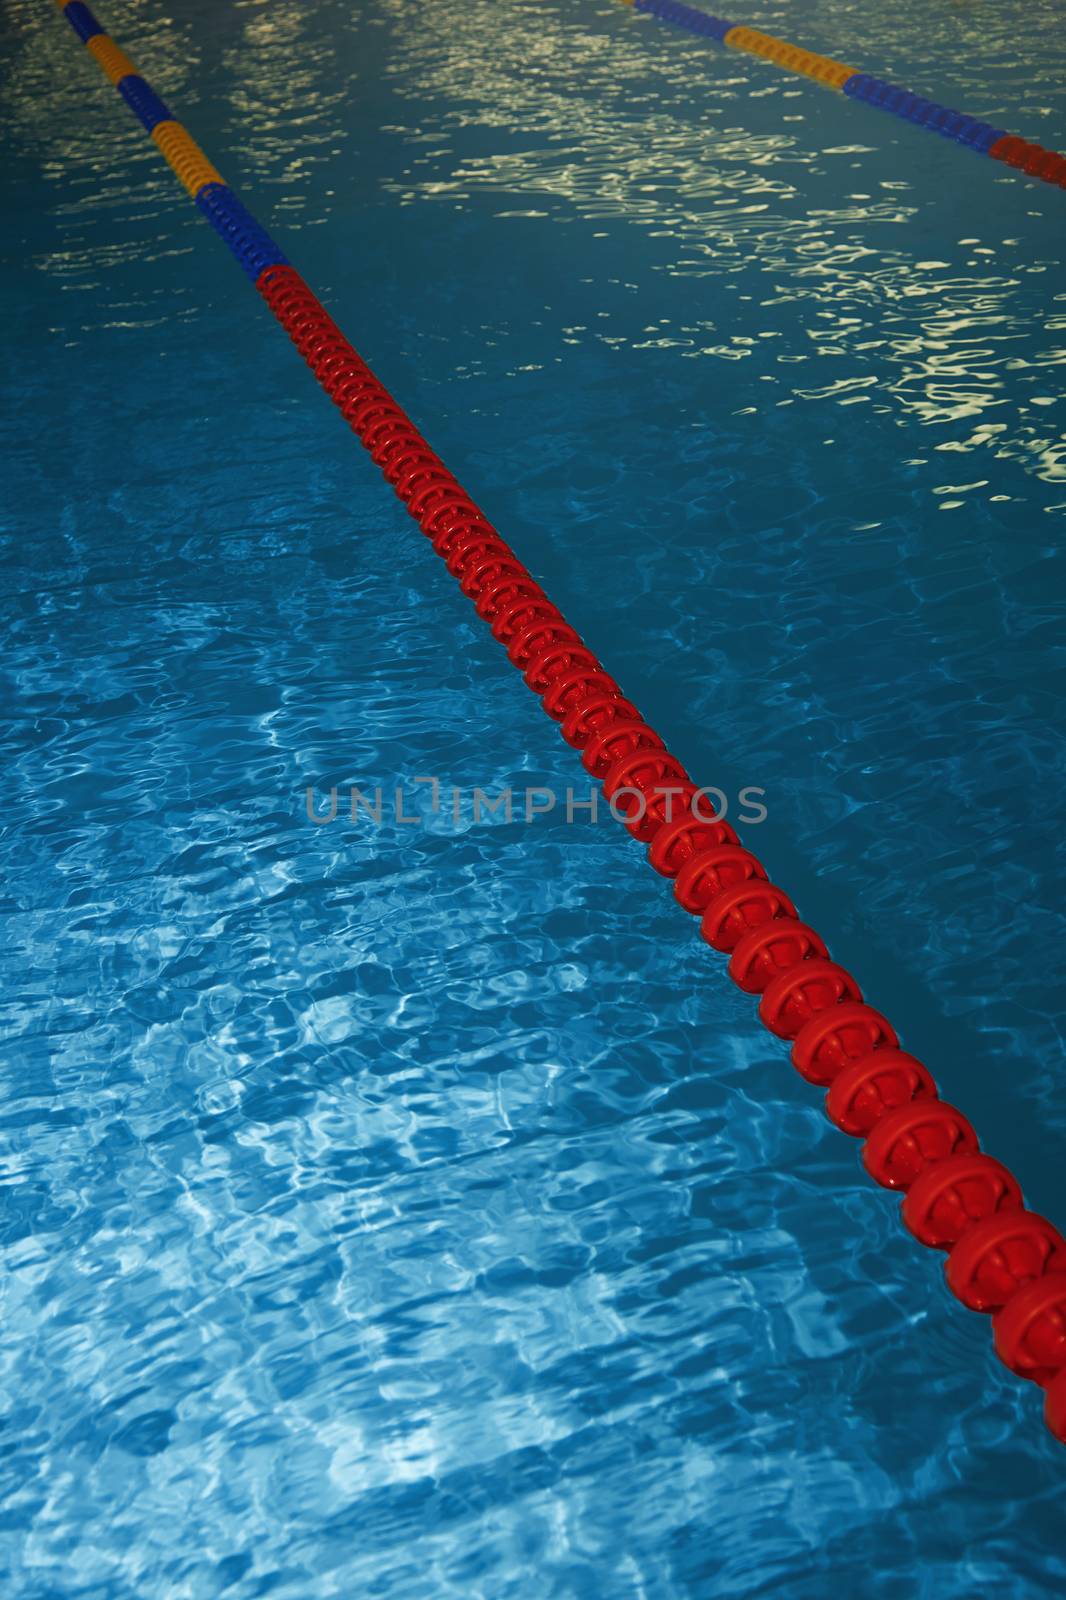 Swimming pool with lane markers. Vertical photo